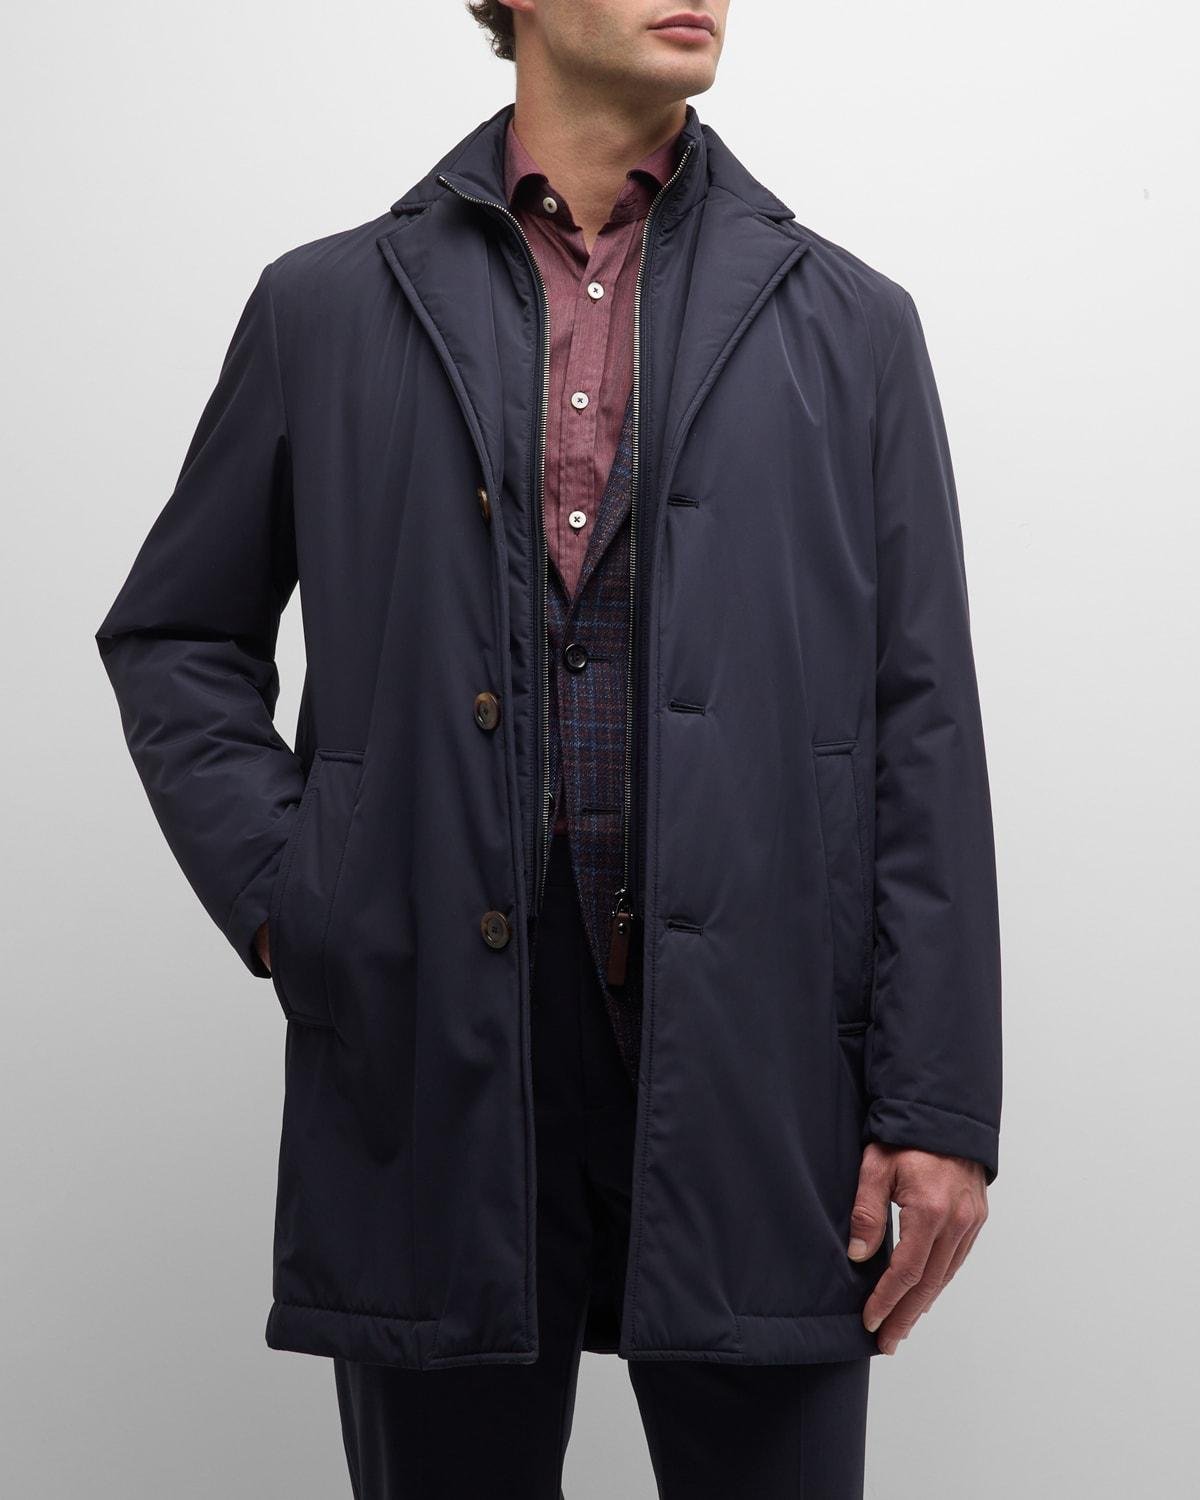 Men's Tech Topcoat with Detachable Bib by CANALI